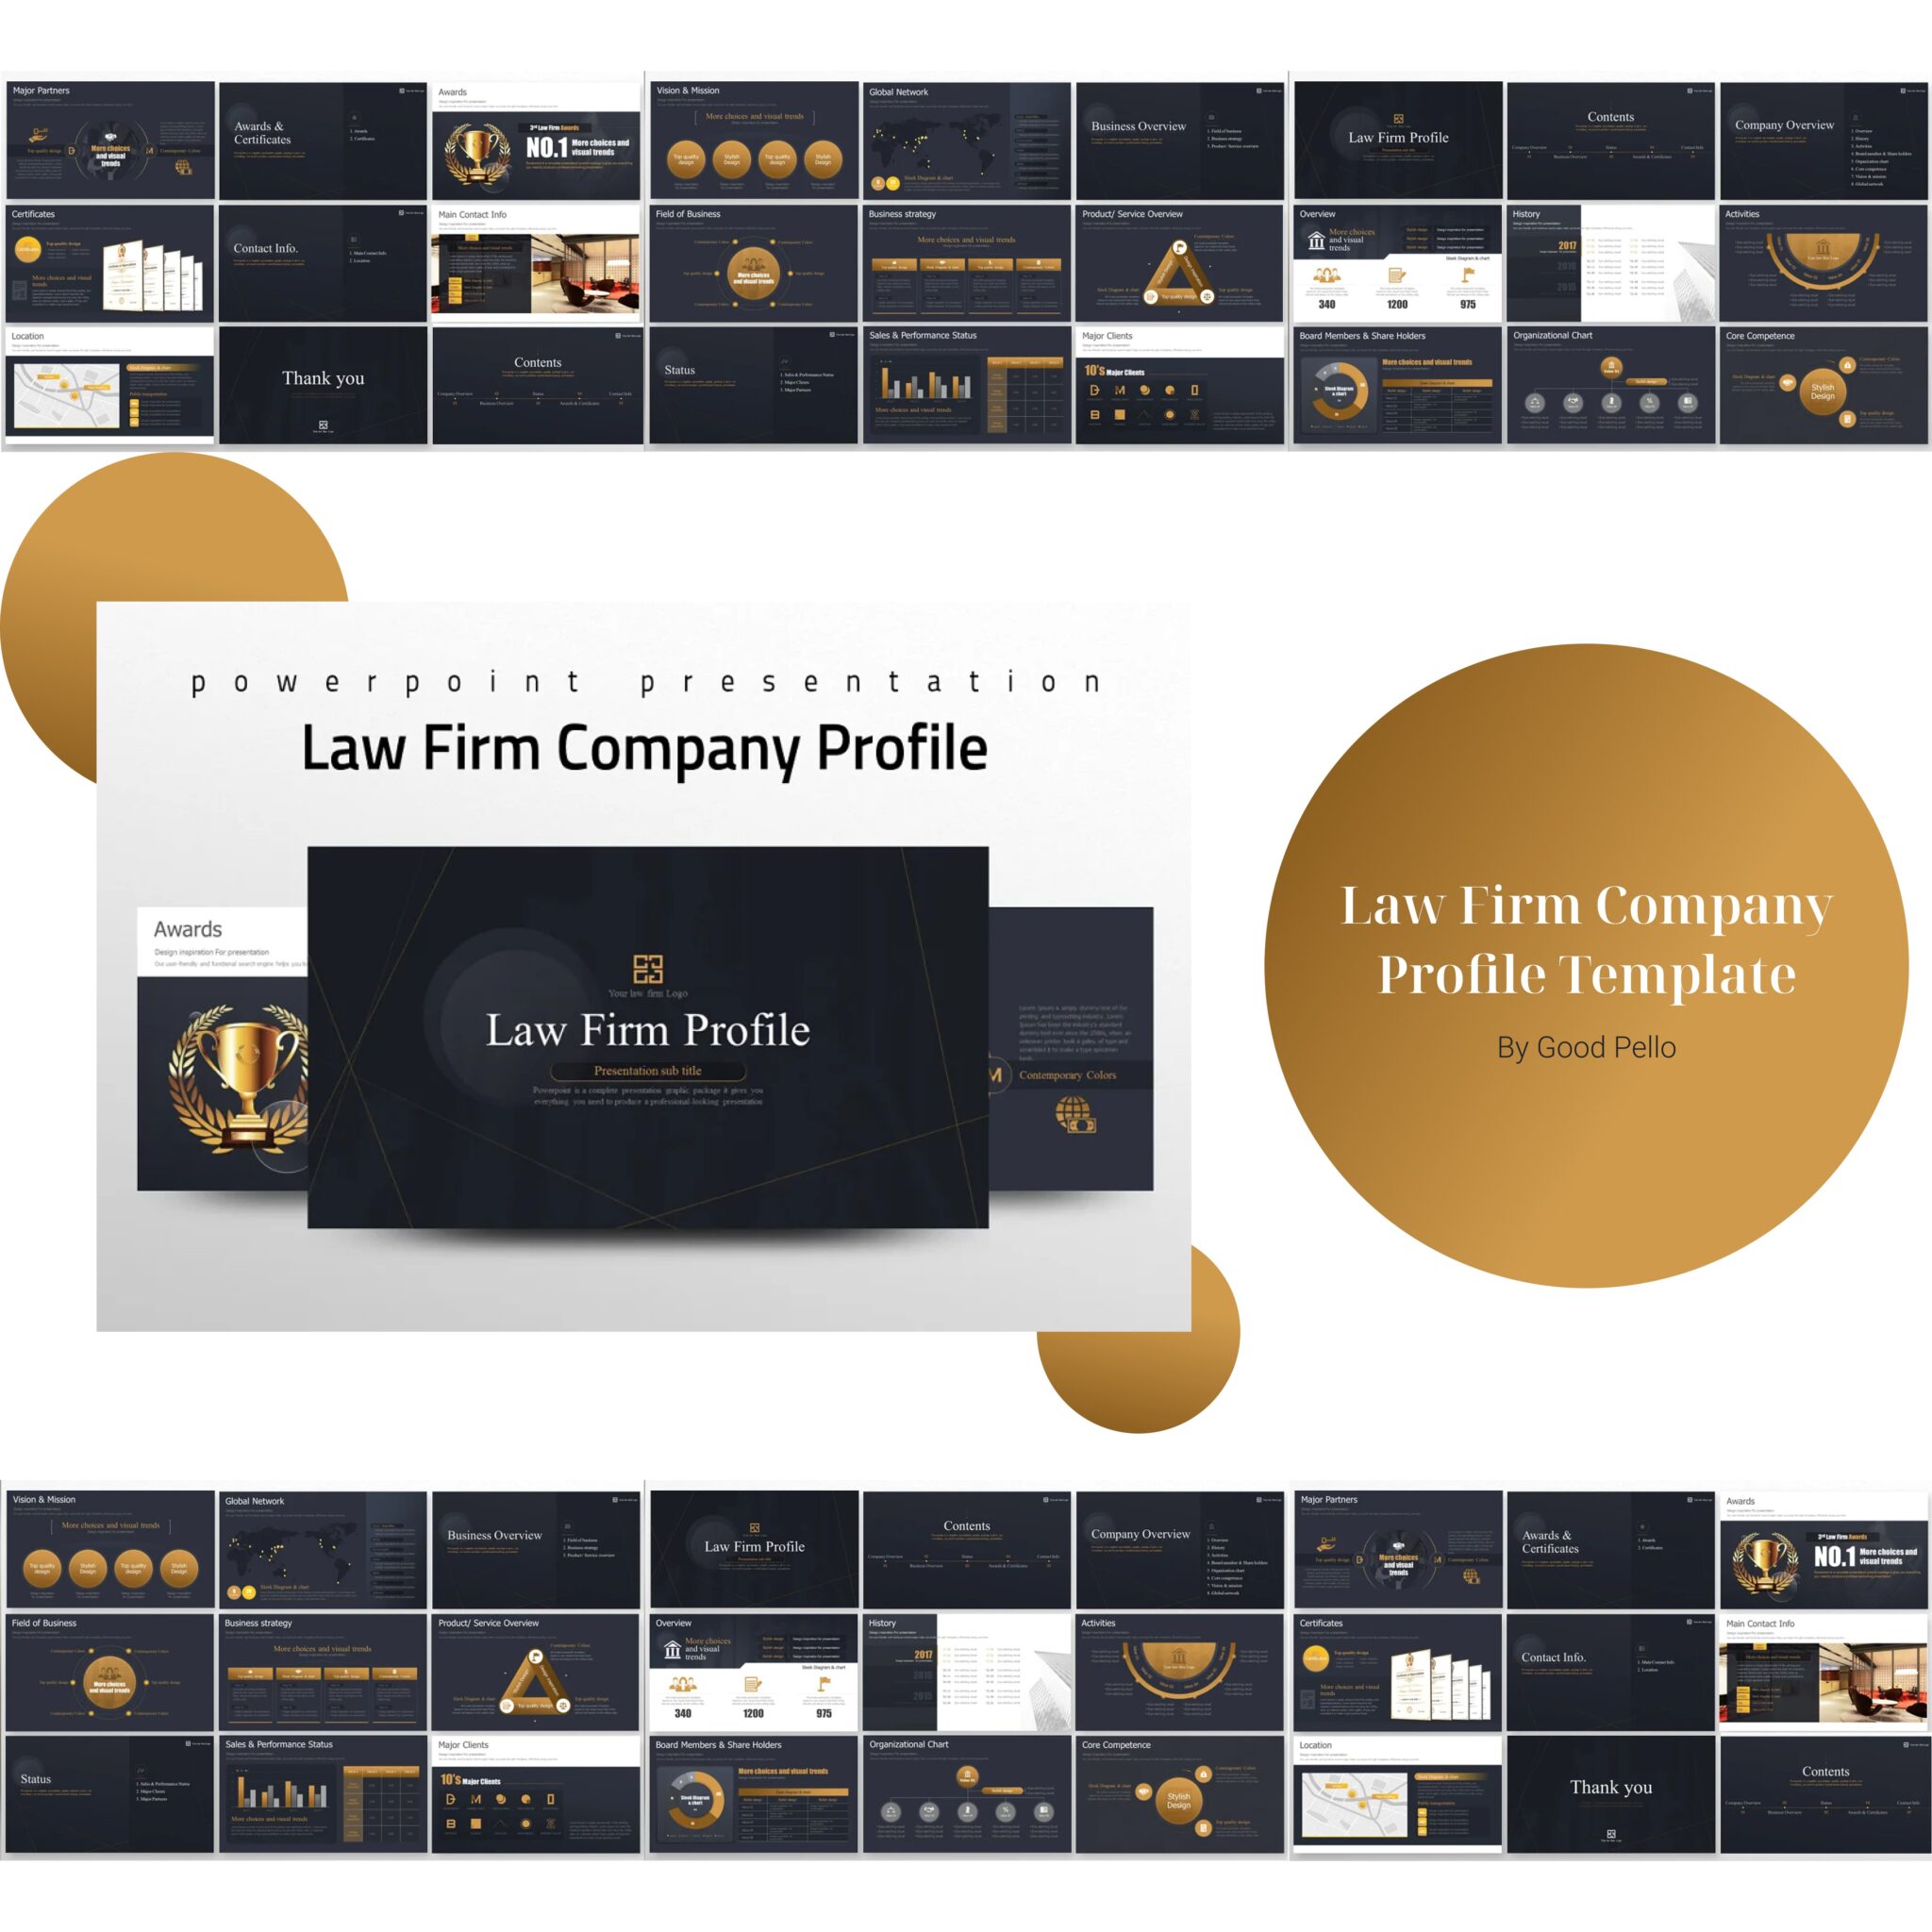 2law Firm Company Profile Template 2048x2048 